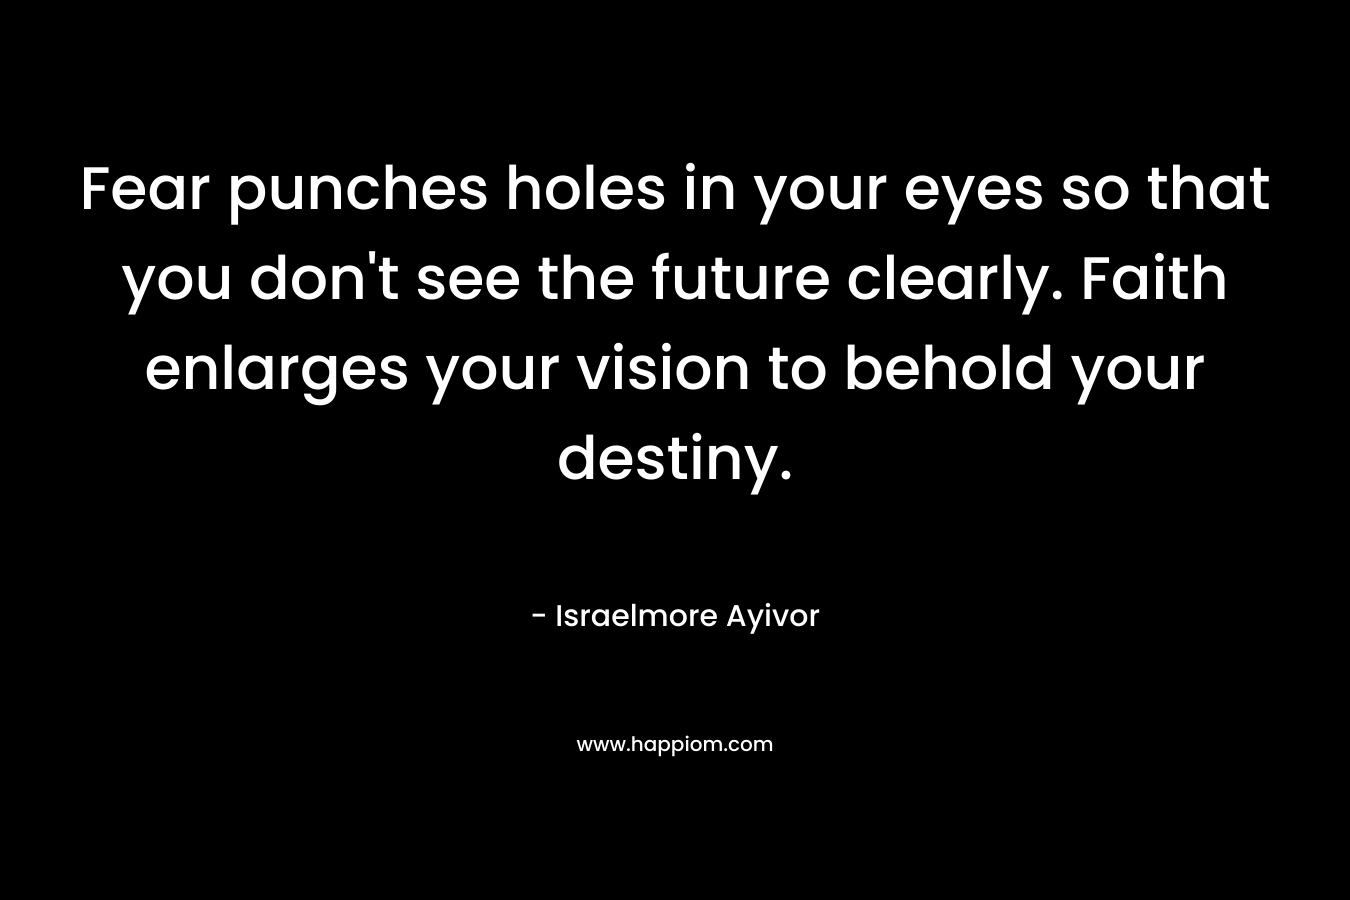 Fear punches holes in your eyes so that you don’t see the future clearly. Faith enlarges your vision to behold your destiny. – Israelmore Ayivor